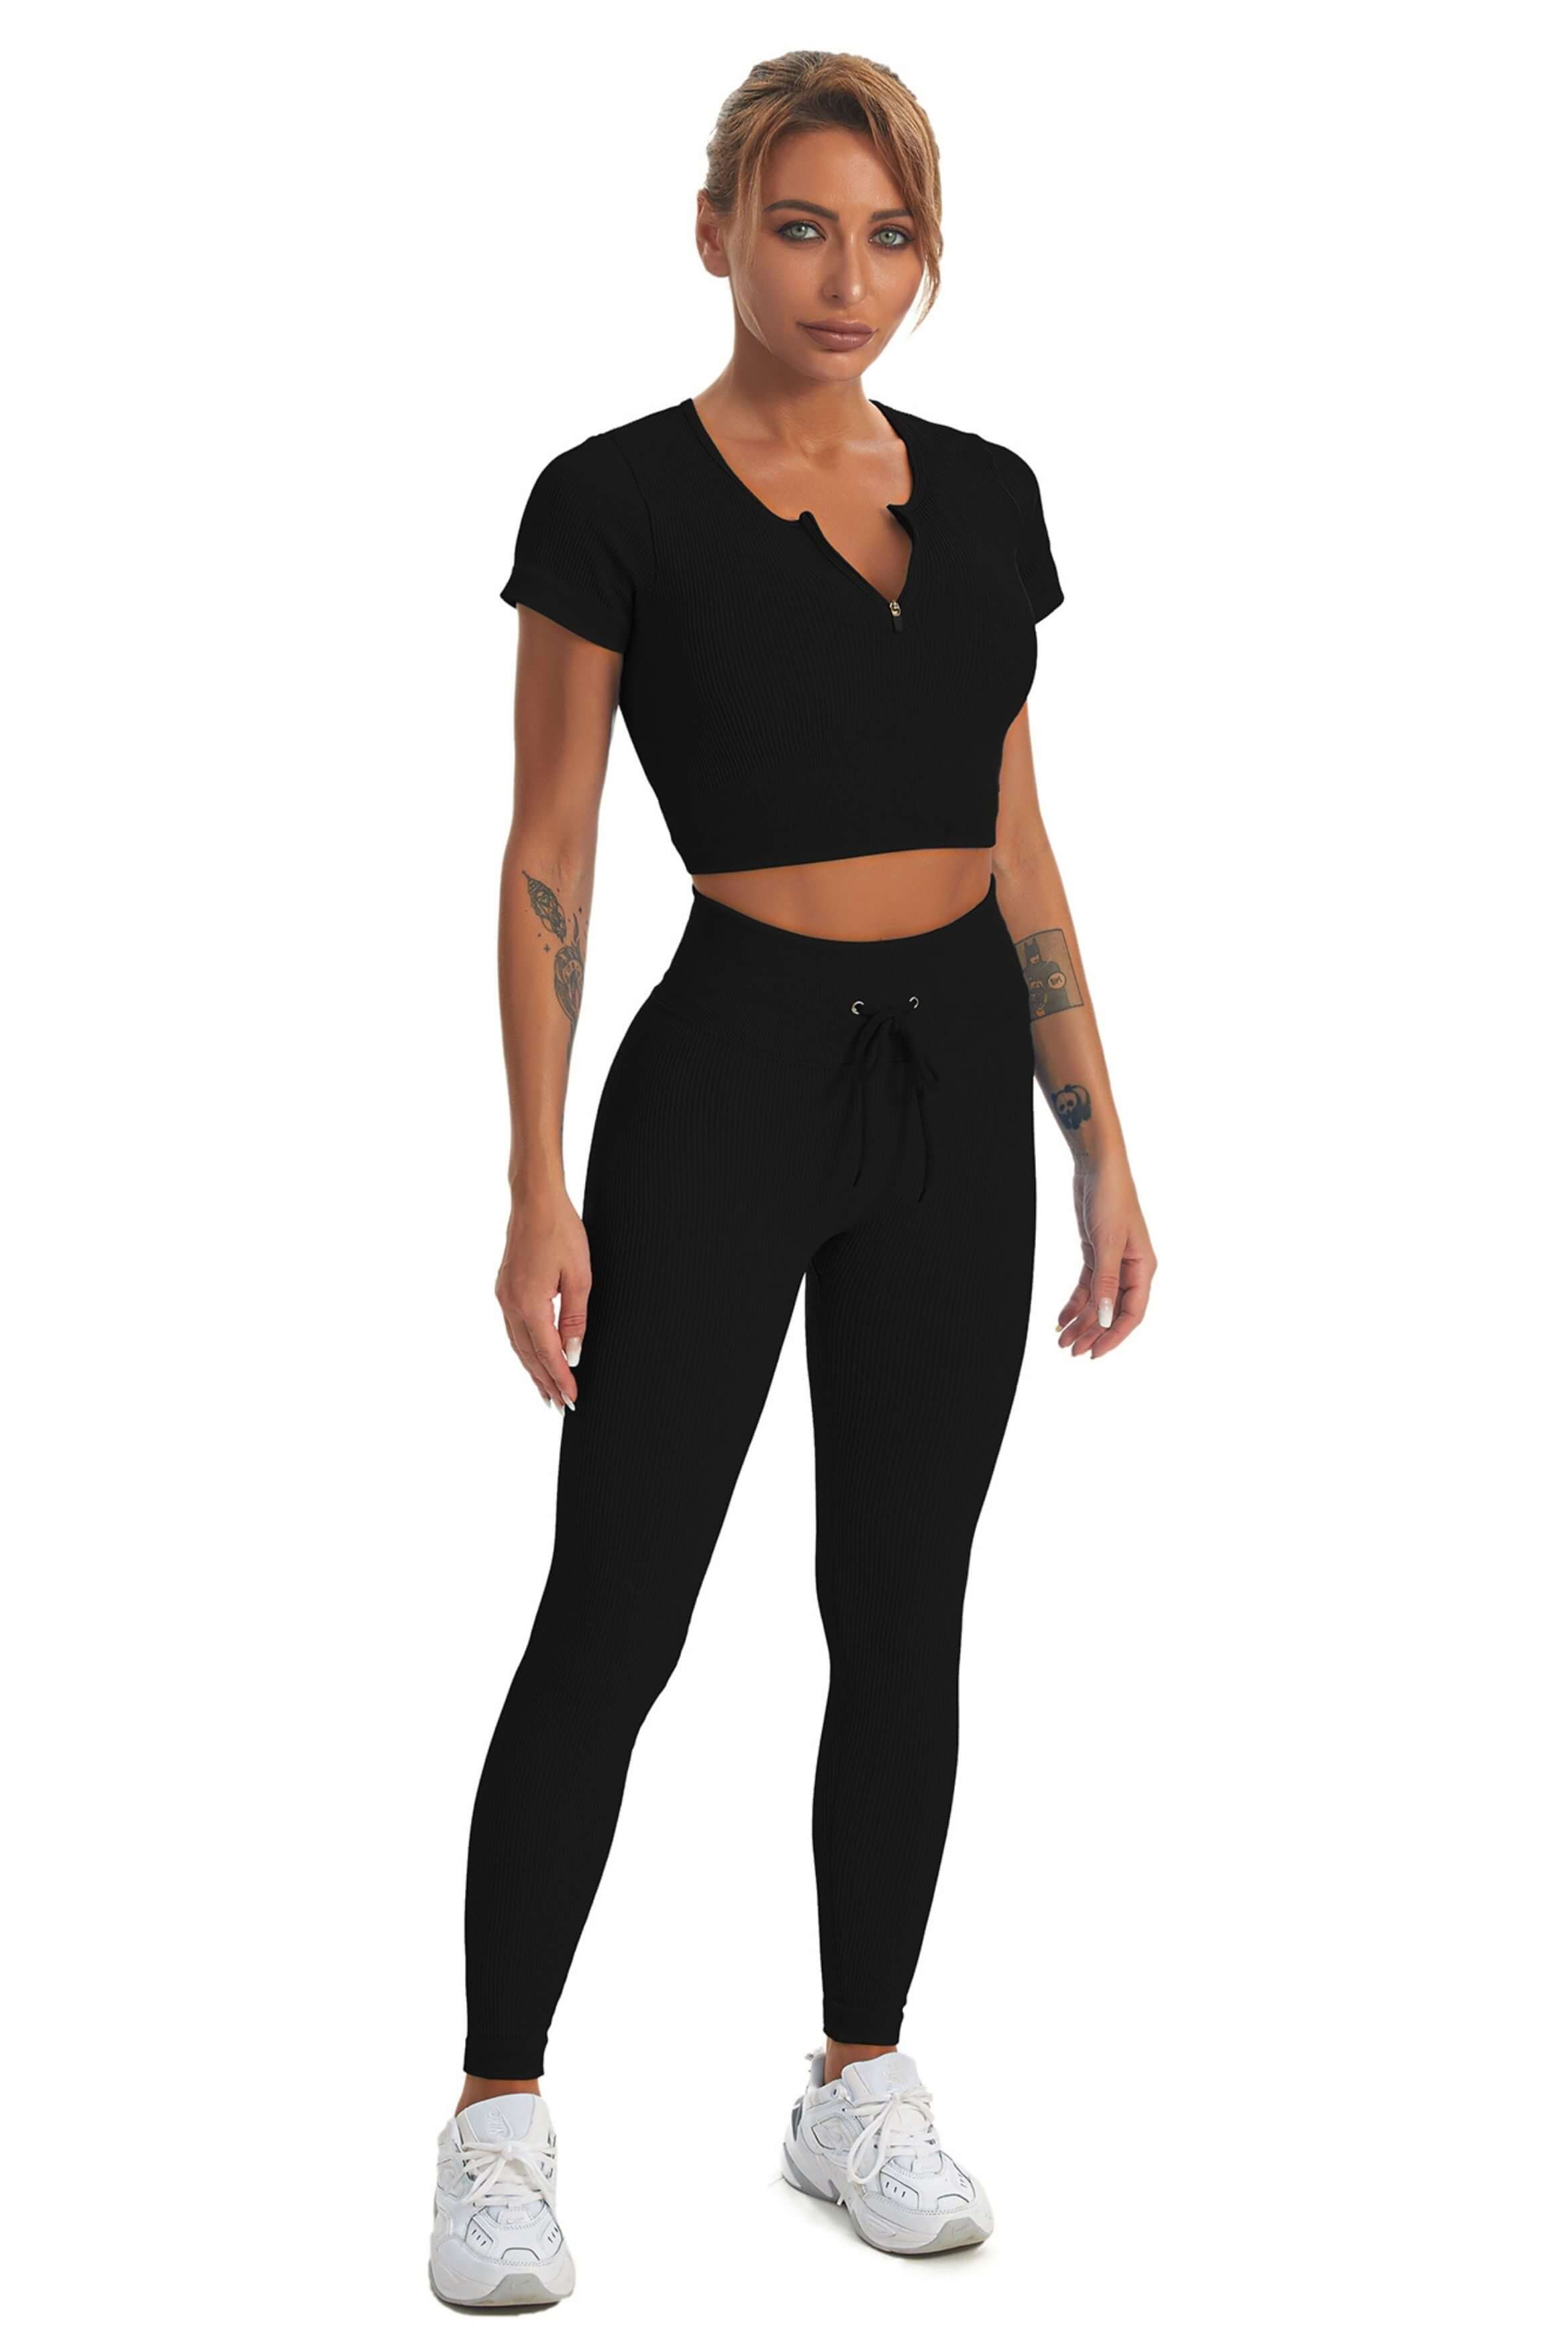 JZC Workout Outfits for Women Ribbed 2 Piece Seamless Sexy Tops V Waist  Yoga Leggings Sets Black Small at  Women's Clothing store